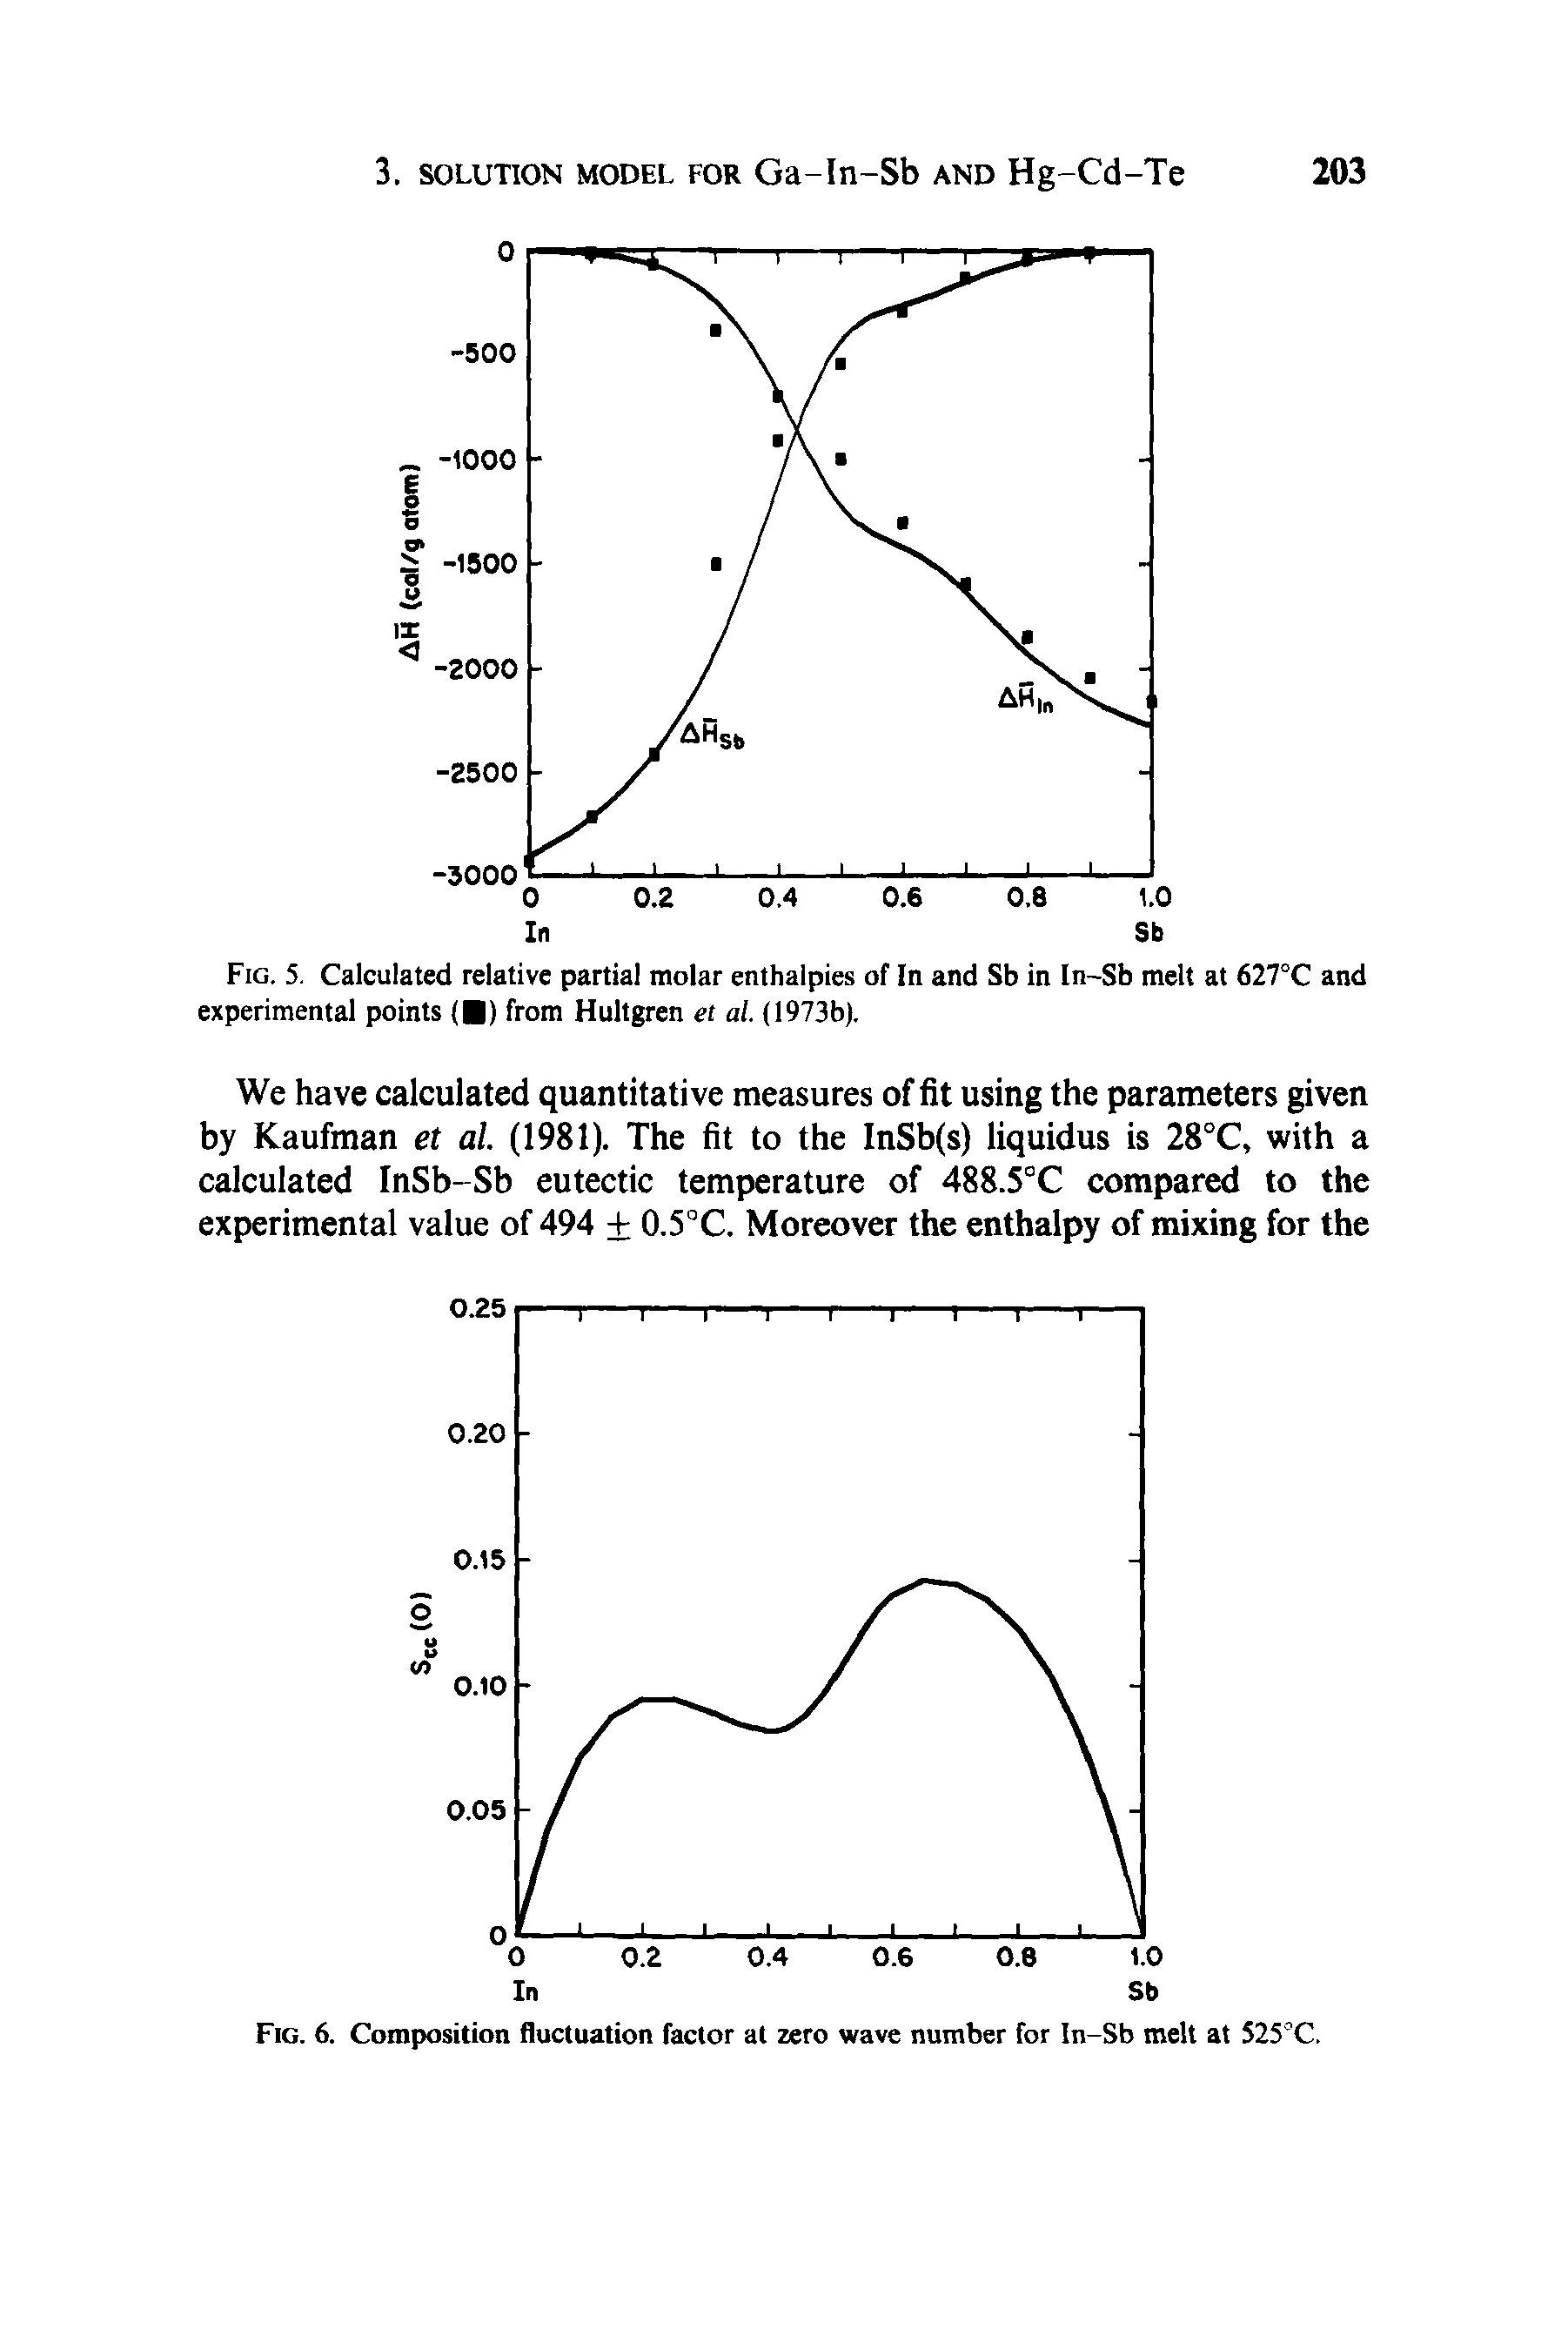 Fig. 6. Composition fluctuation factor at zero wave number for In-Sb melt at 525 C.